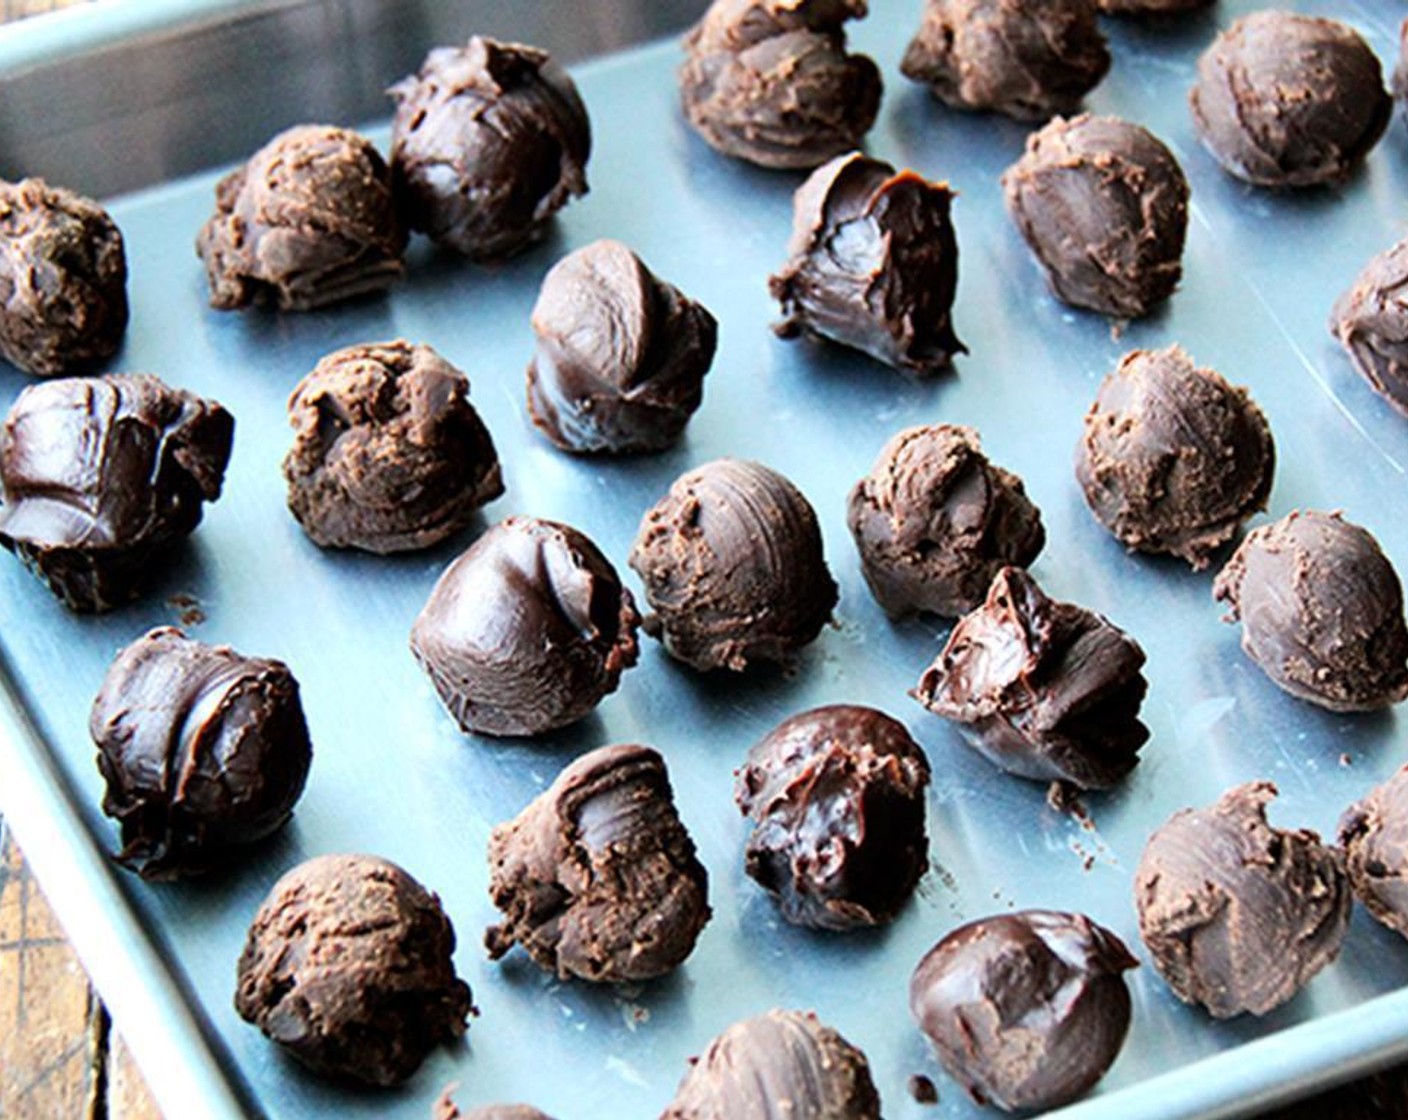 step 4 Drag a melon baller across firm chocolate mixture to shape the truffles. Drop truffles onto clean baking sheet. Refrigerate truffles for 15 minutes once formed. As you shape, if the chocolate gets too soft, stick the pan back in the fridge for a bit. If it seems too hard, let it sit at room temperature until it is manageable.